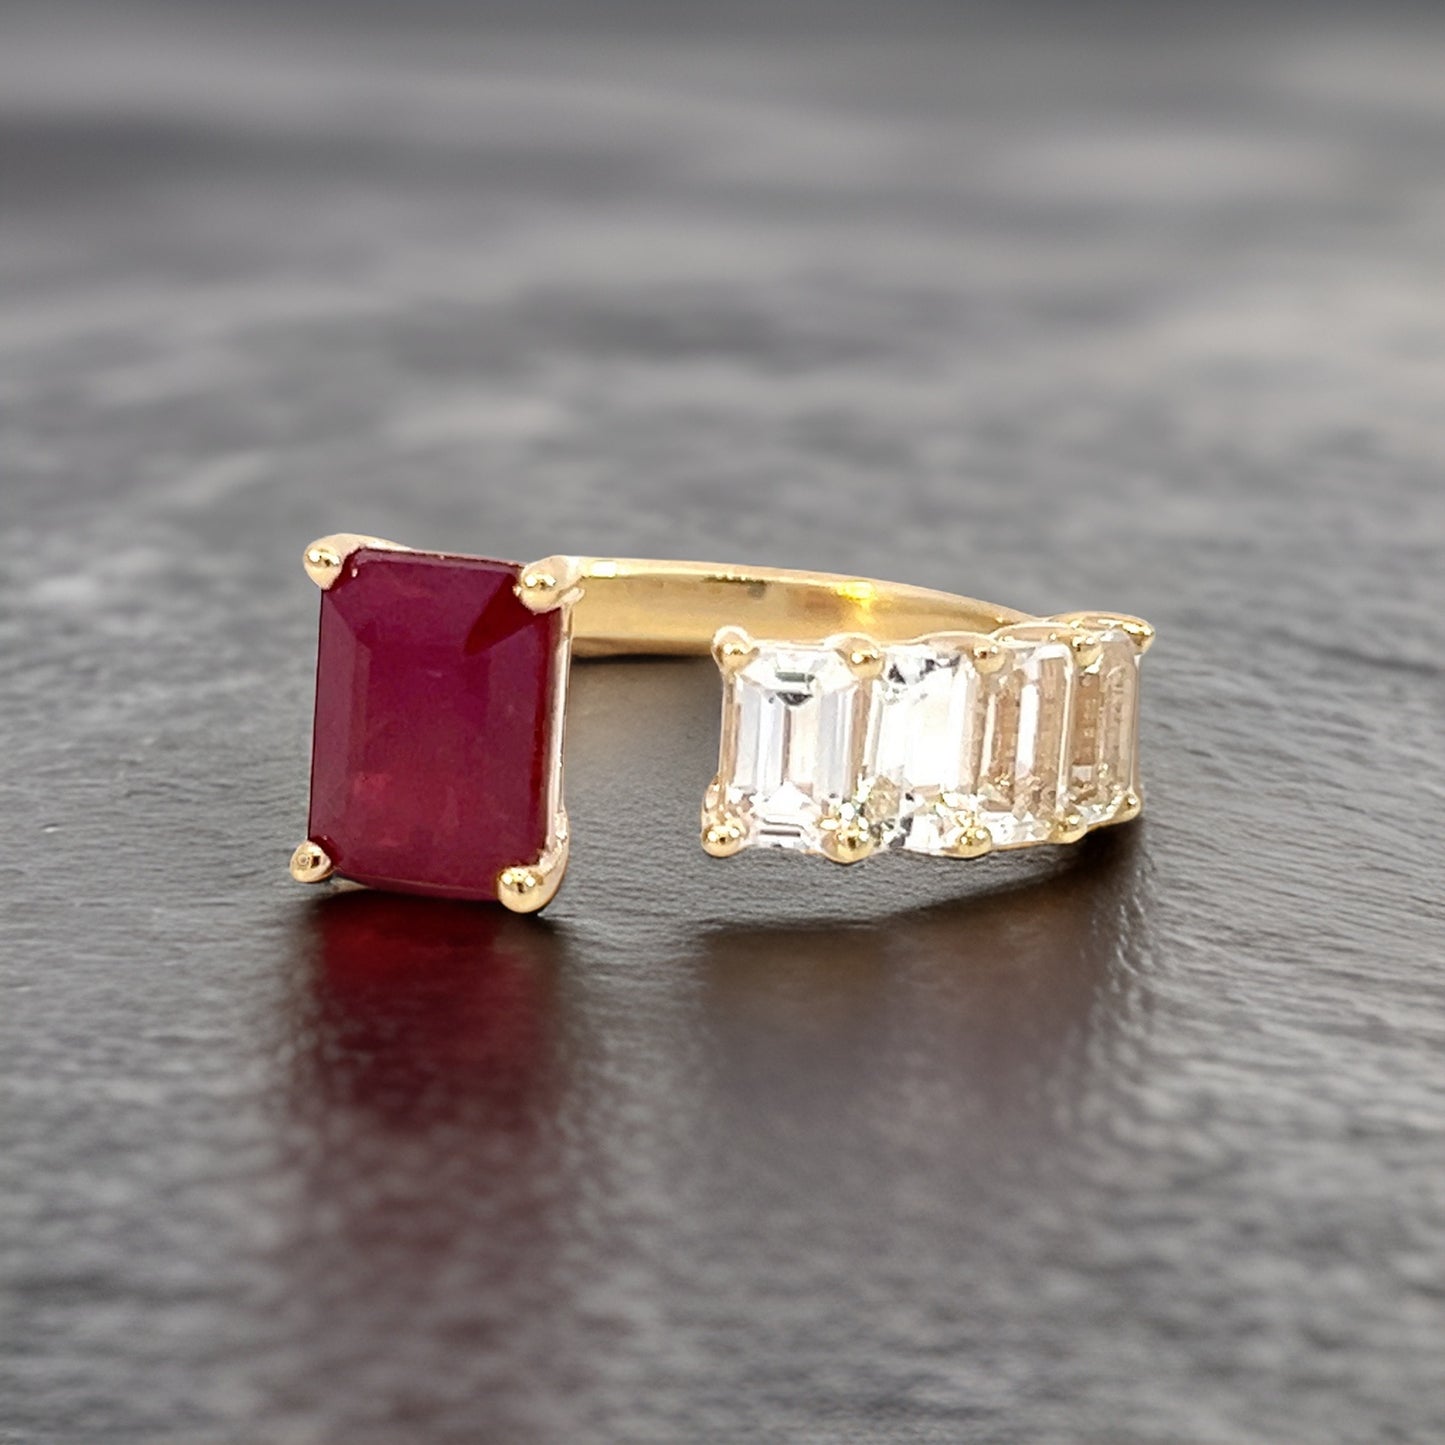 Natural Ruby Sapphire Ring 6.5 14k W Gold 3.64 TCW Certified $4,950 310635